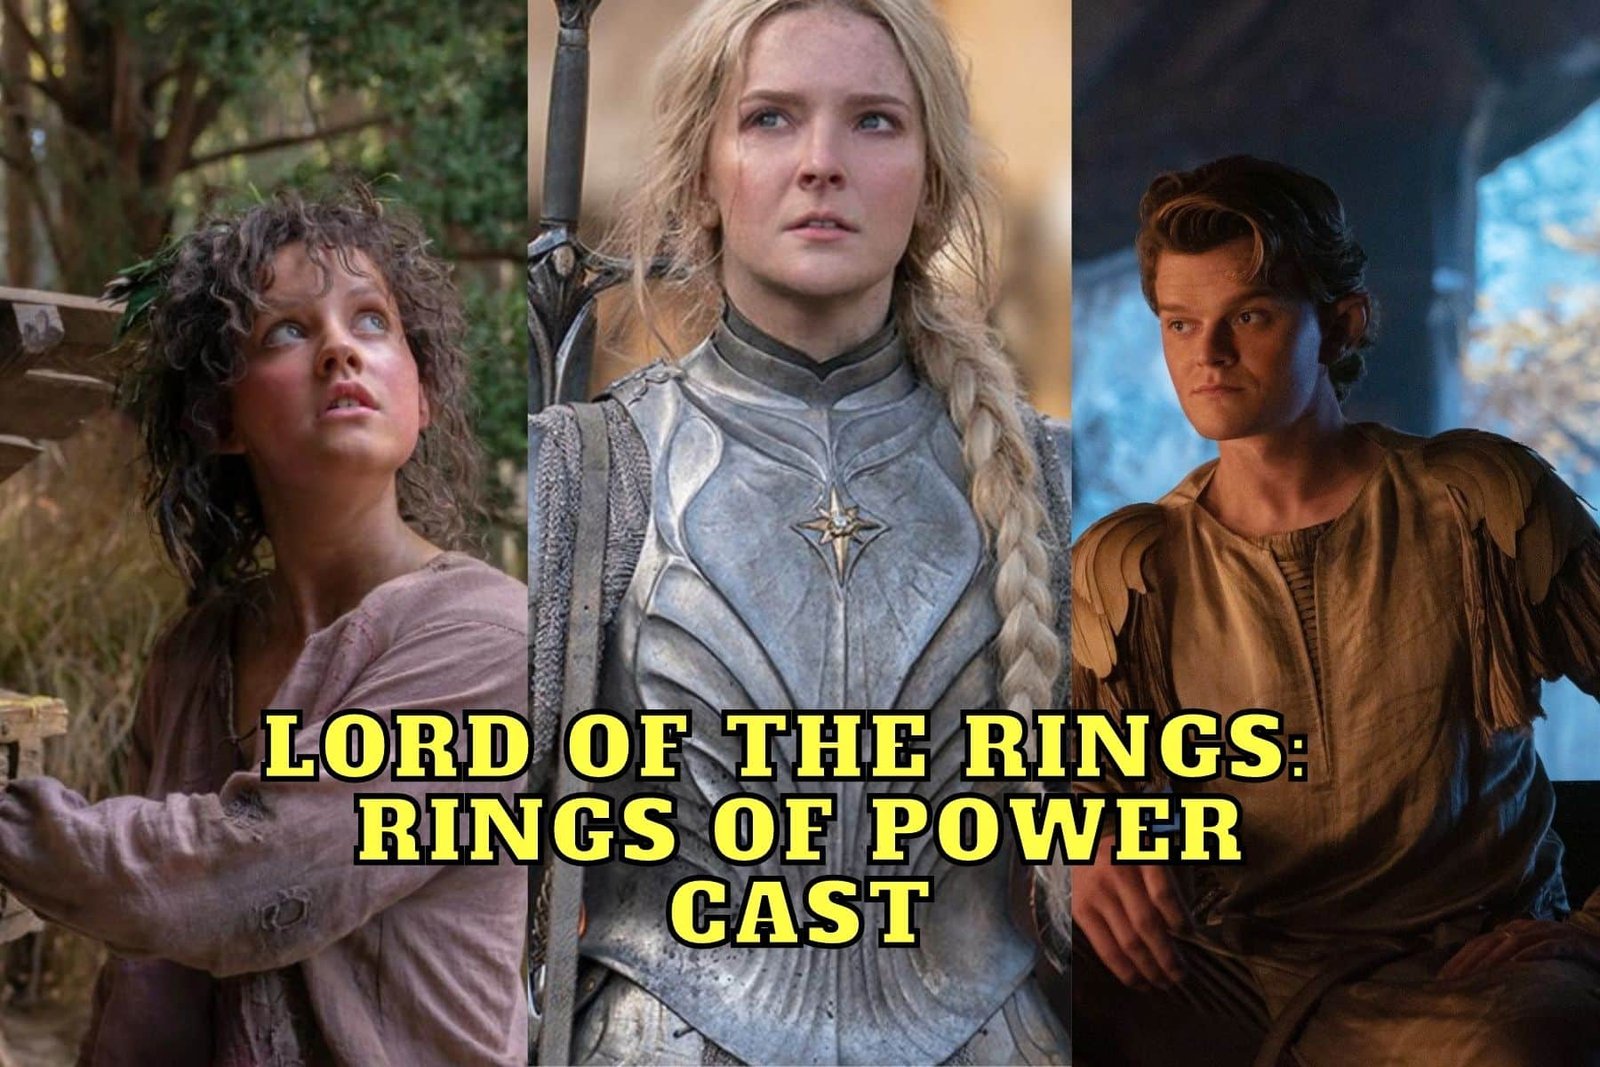 Lord of the Rings: Rings of Power Cast - Ages, Partners, Characters